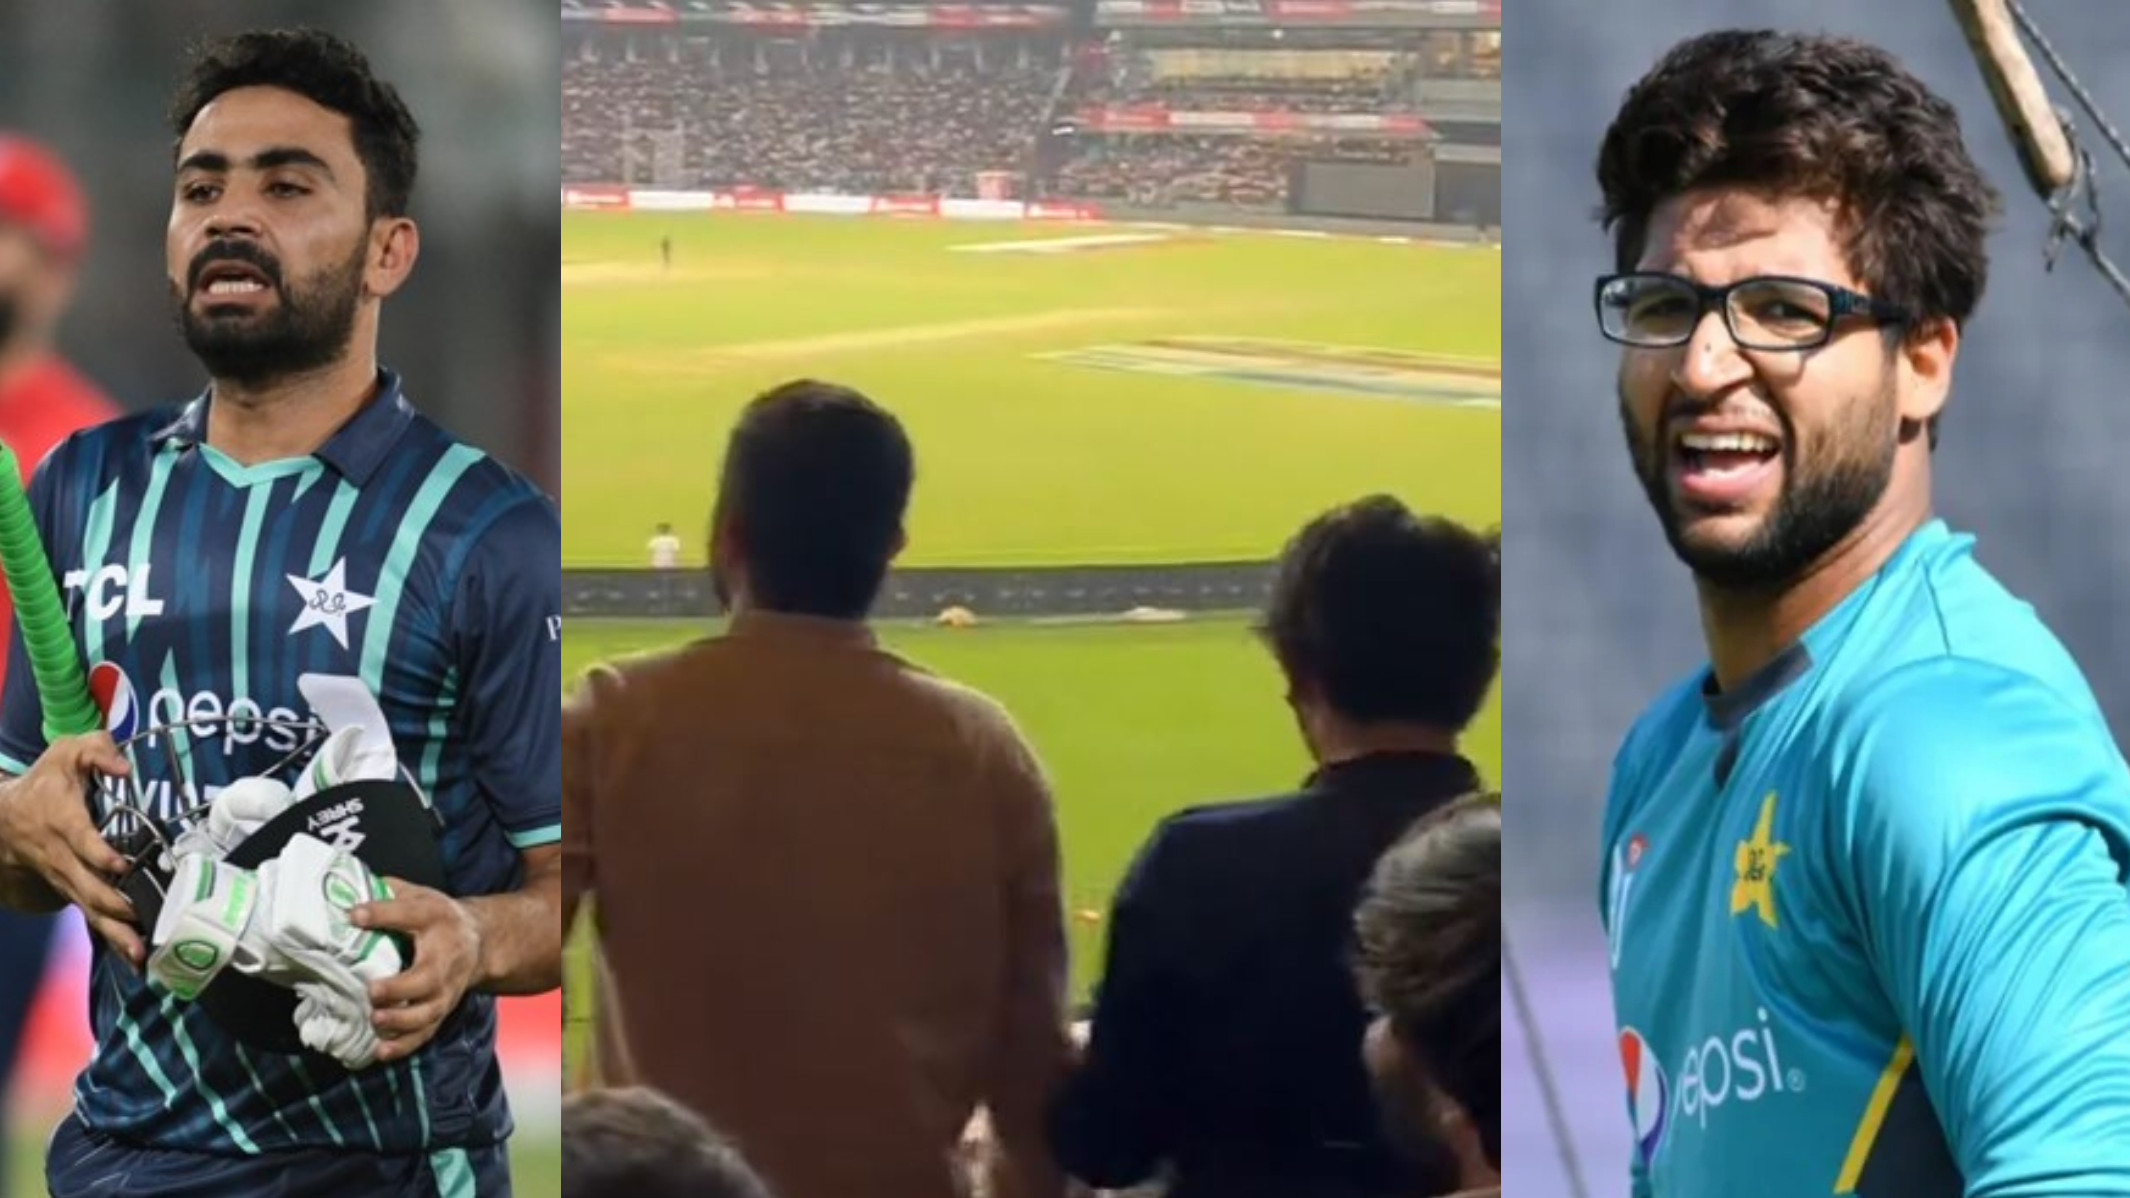 PAK v ENG 2022: 'We play for you and Pakistan'- Imam says after viral video of Pakistan fans shouting 'Parchi' at Khushdil